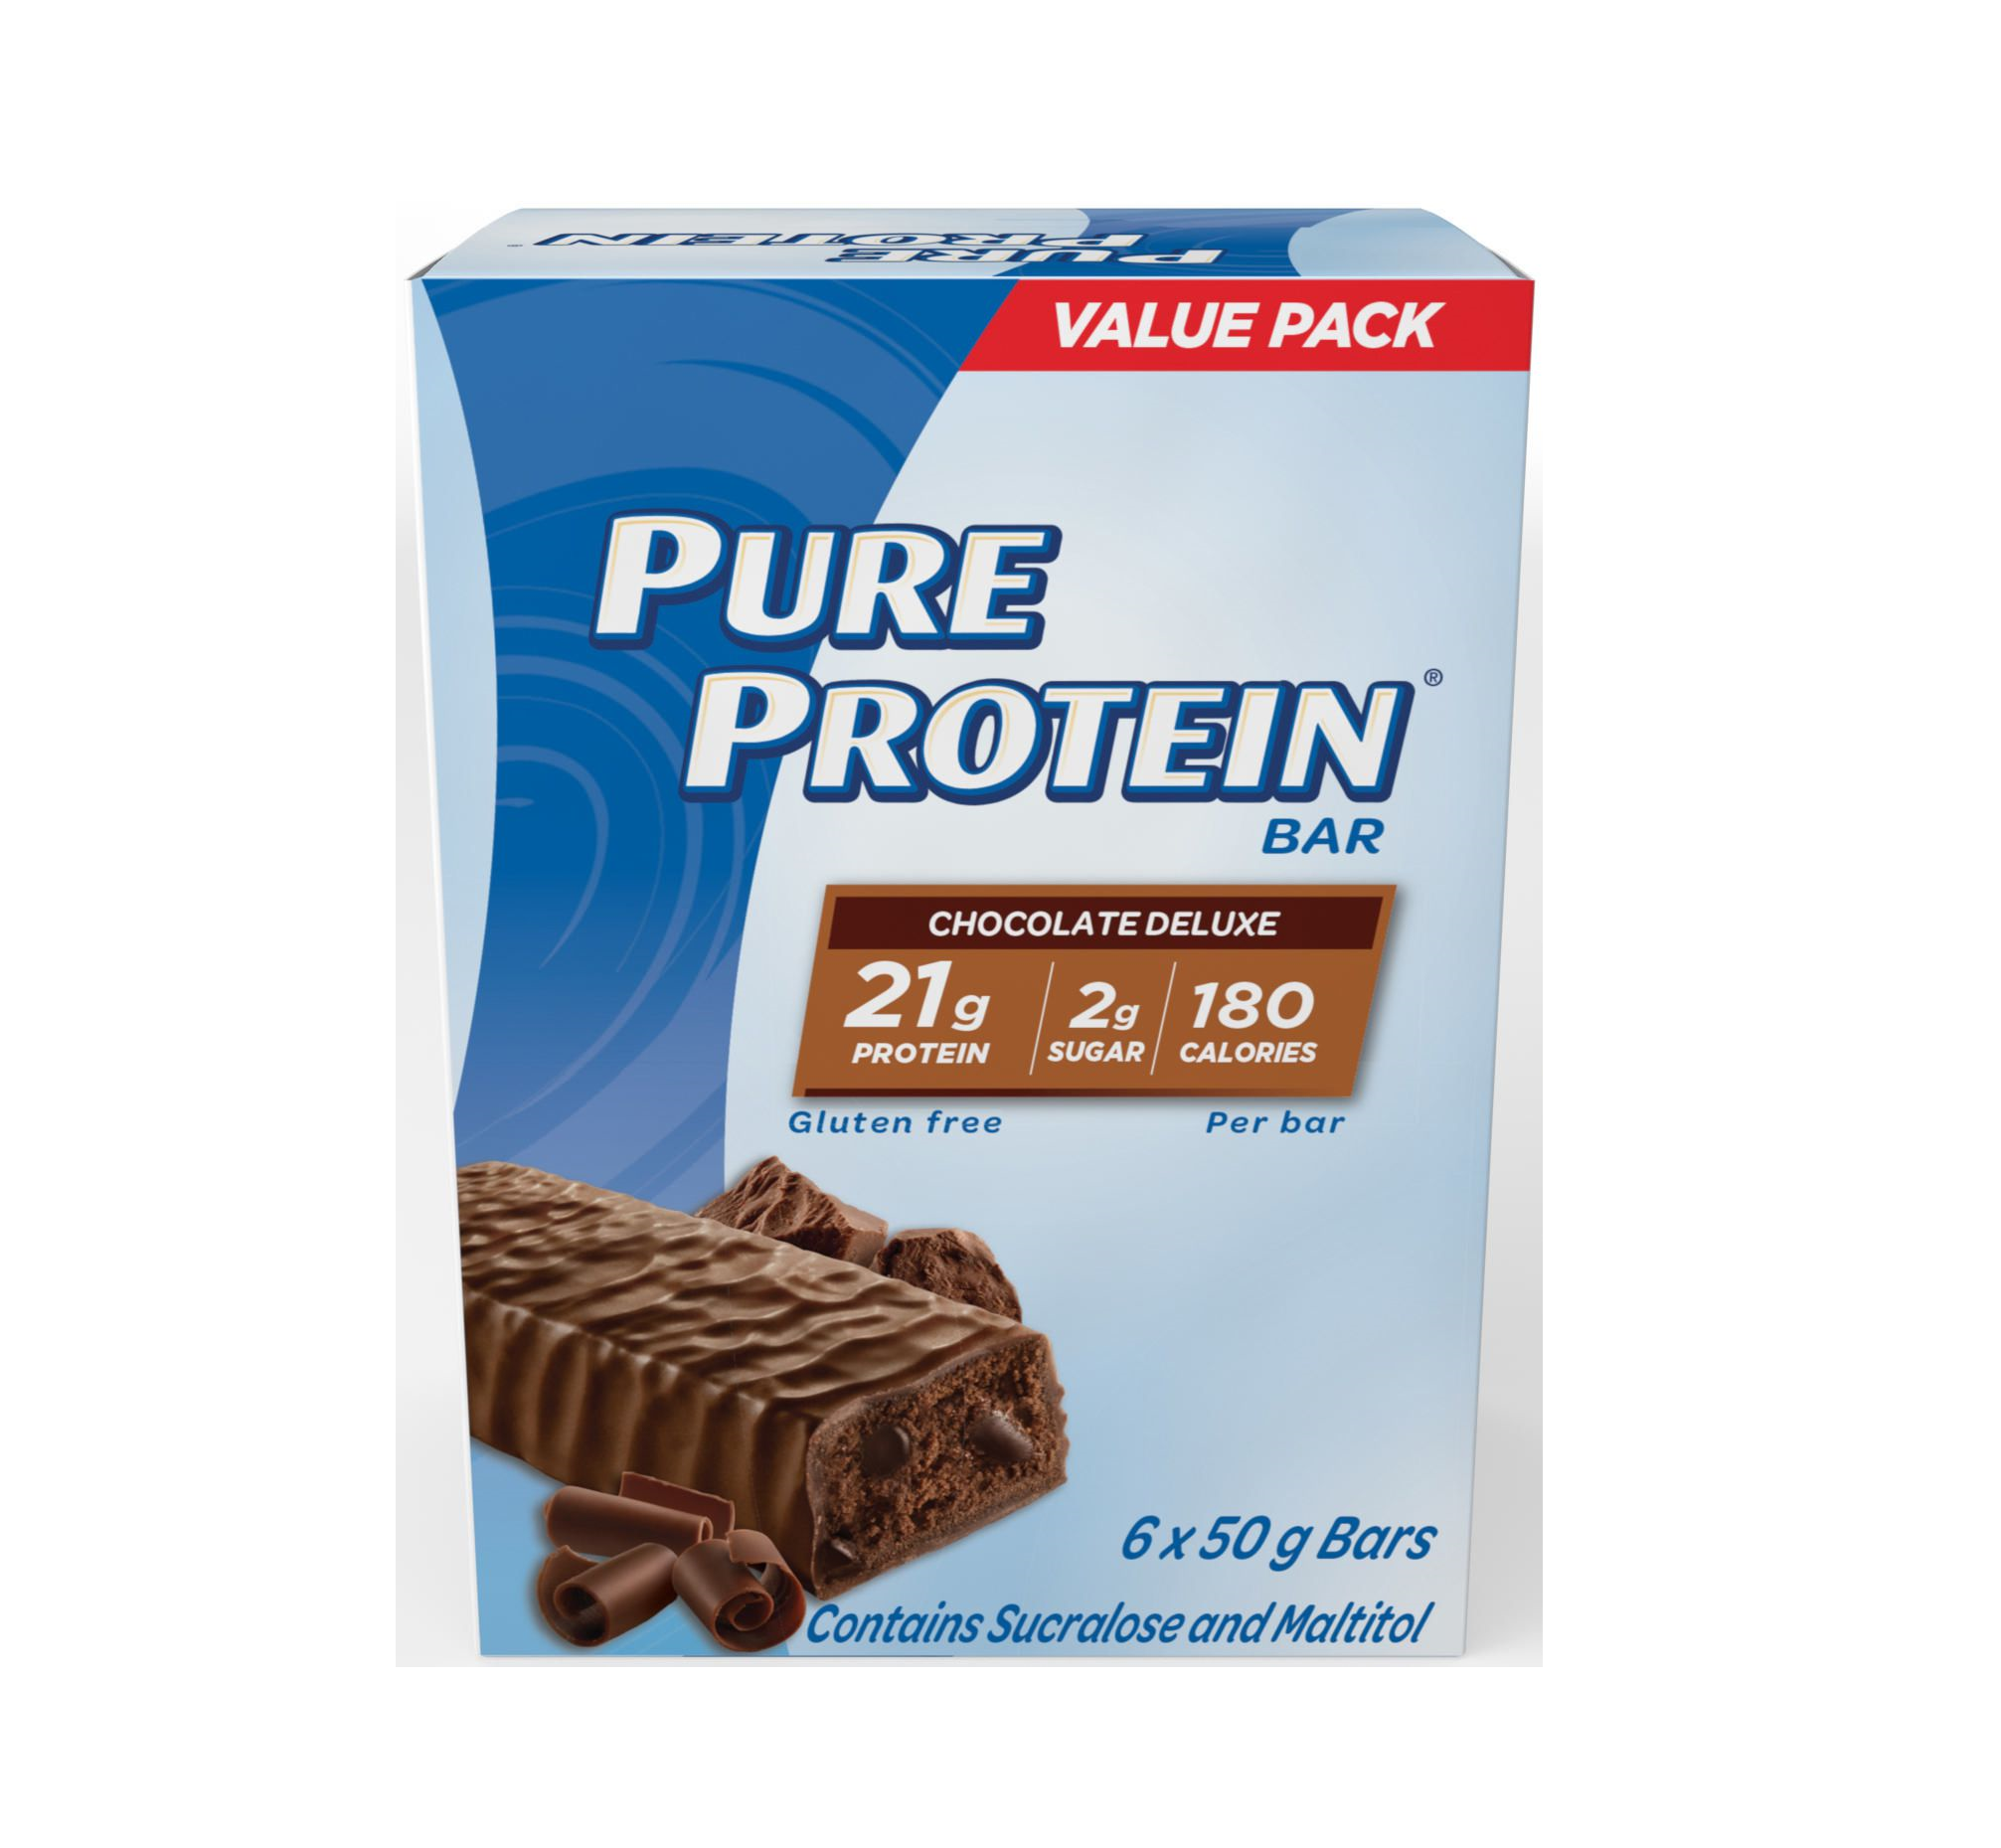 Pure Protein Bar Chocolate Deluxe 6x50g Bars